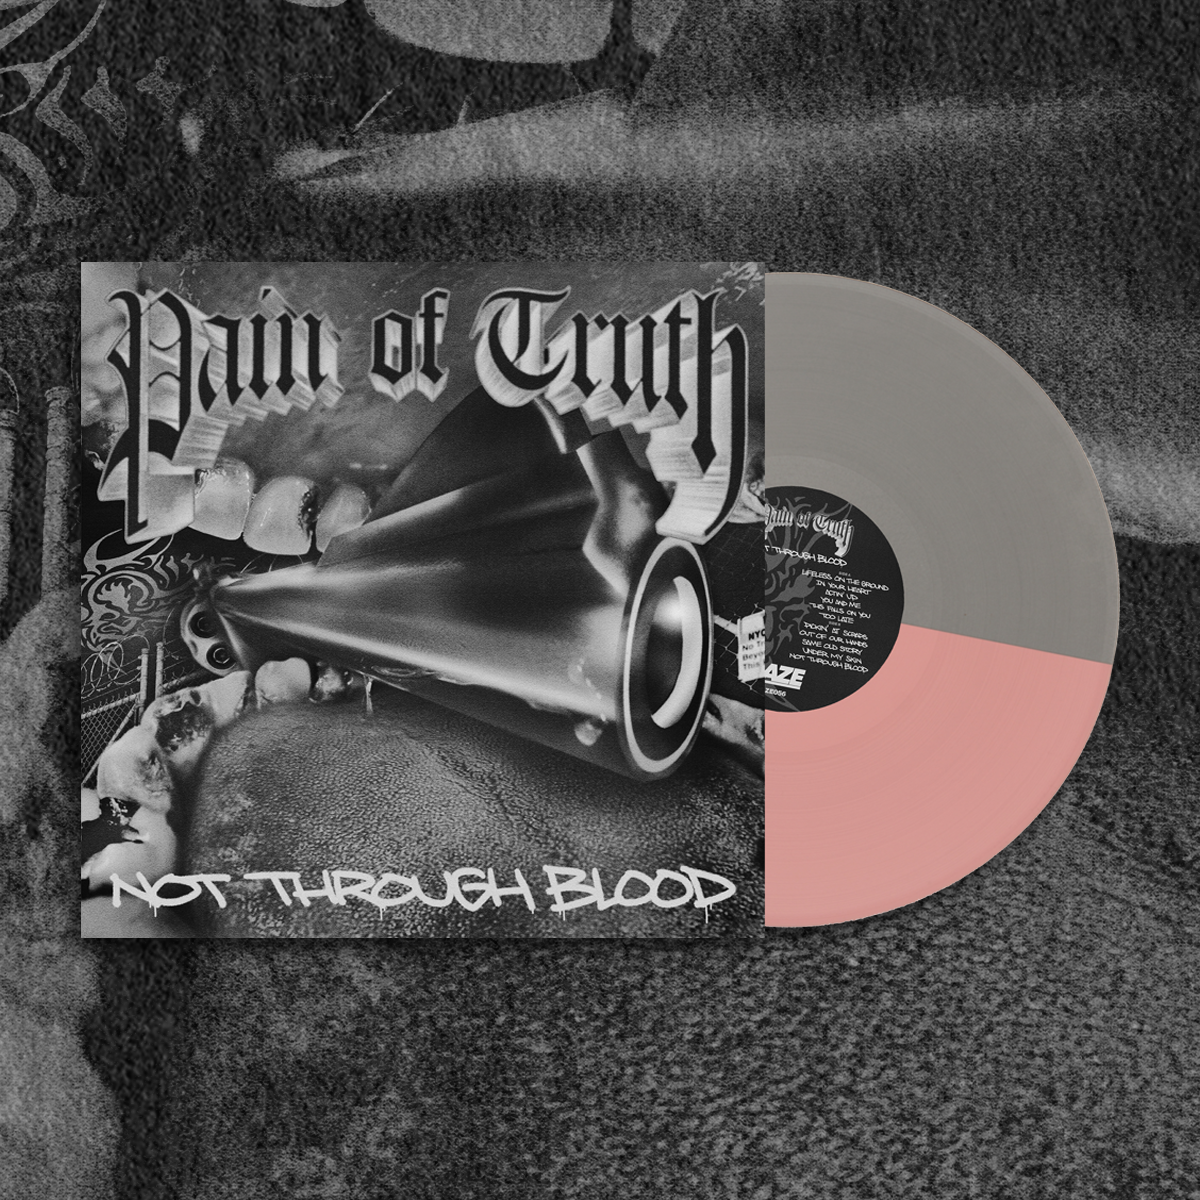 PAIN OF TRUTH "NOT THROUGH BLOOD" LP - HALF SILVER / HALF PINK (PRE-ORDER)